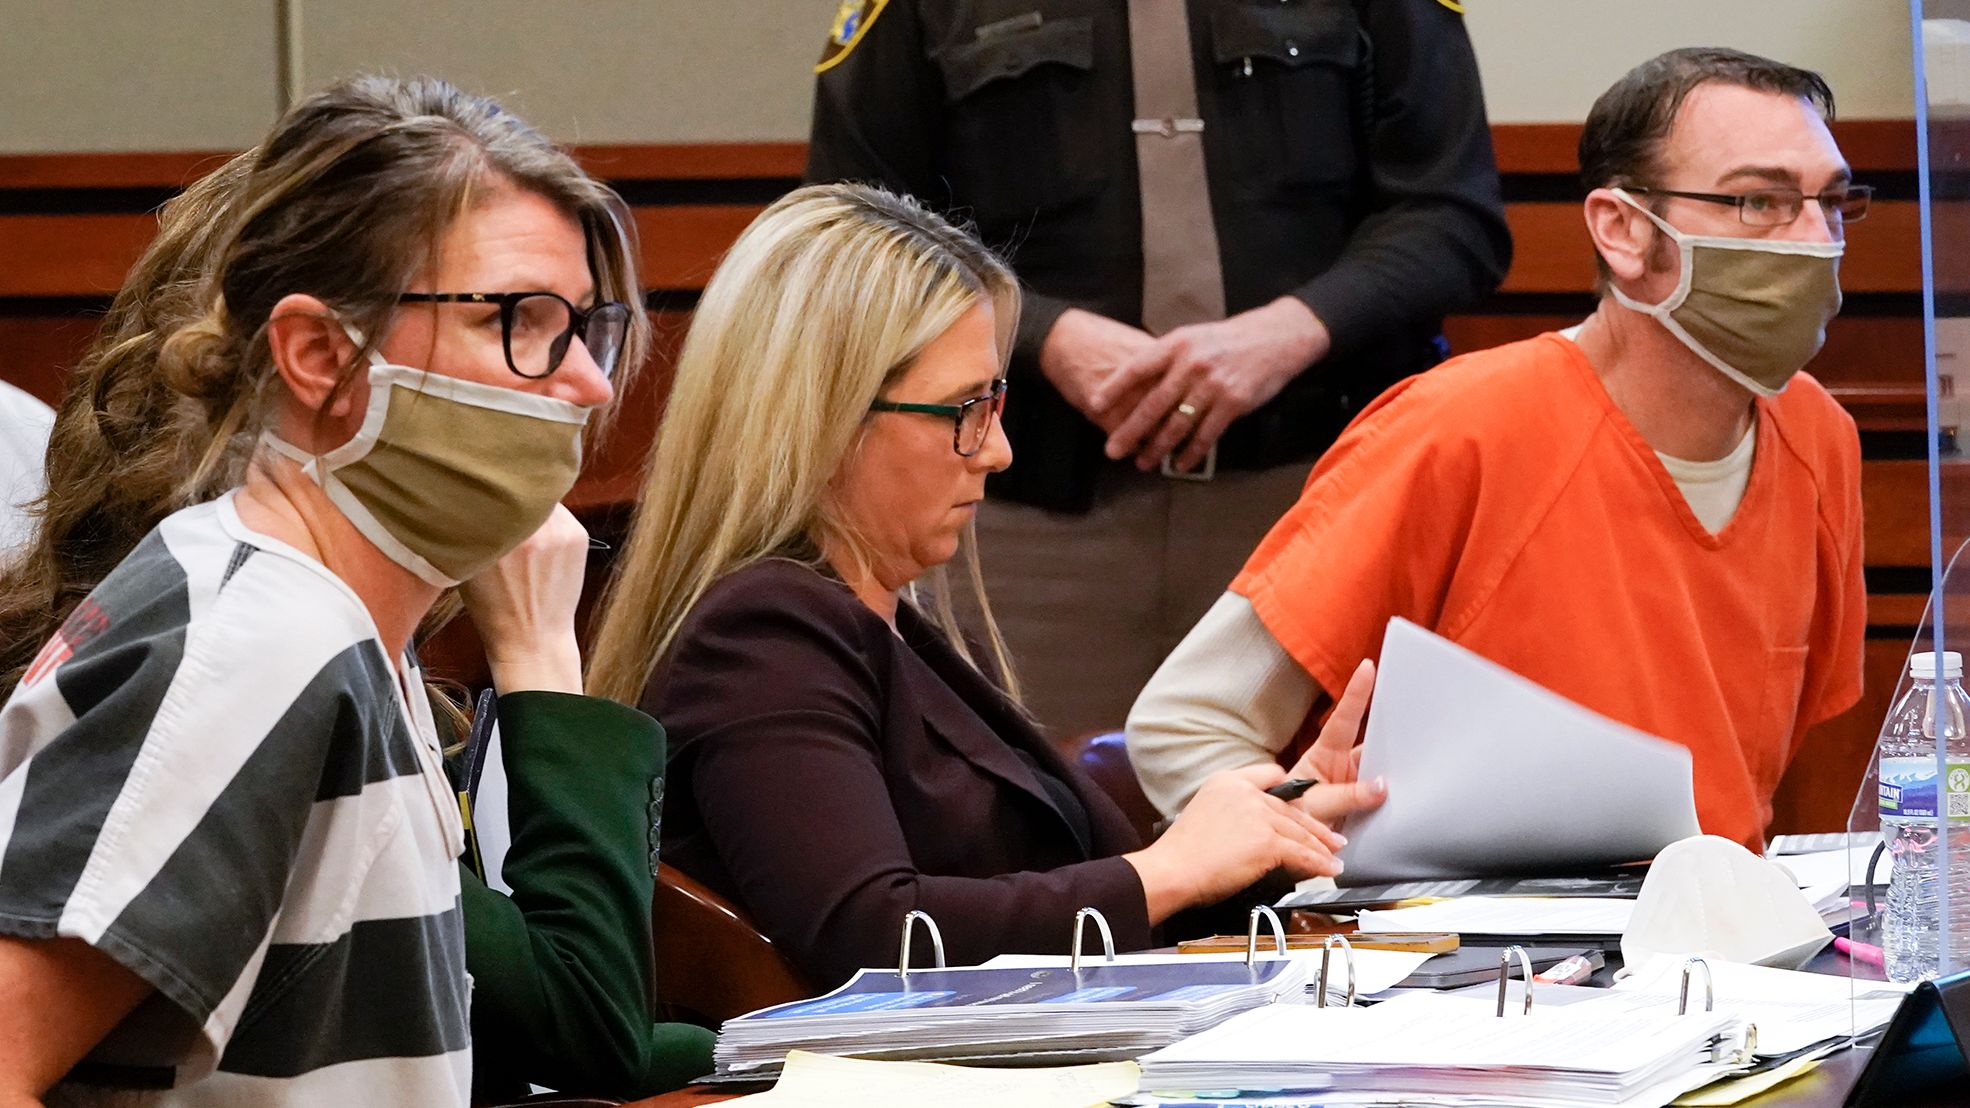 Jennifer Crumbley, left, and James Crumbley, right, appear in court for a preliminary examination on involuntary manslaughter charges in Rochester Hills, Michigan, on February 8, 2022.